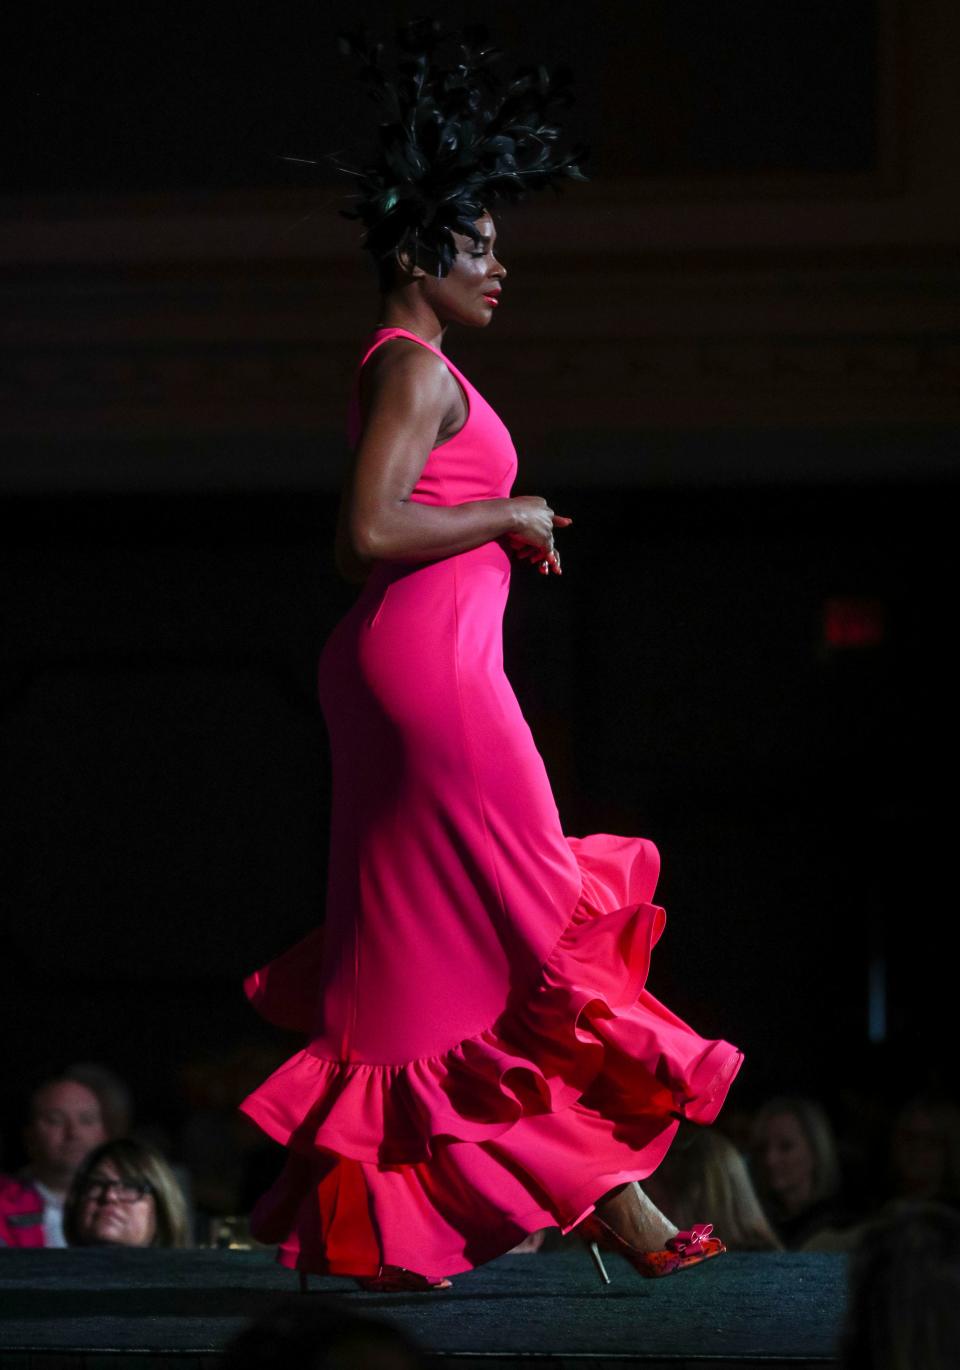 At the 2023 KDF Dillard's Fashion Show, the spring color palette features saturated, vibrant colors as well as updated twists on '90s neon. Also there's the femme fatales and ingenues, with ultra-feminine looks from edgy suits to sheer fabrics and florals. And also Red-carpet ready styles with ruffles and big bows. March 30, 2023 